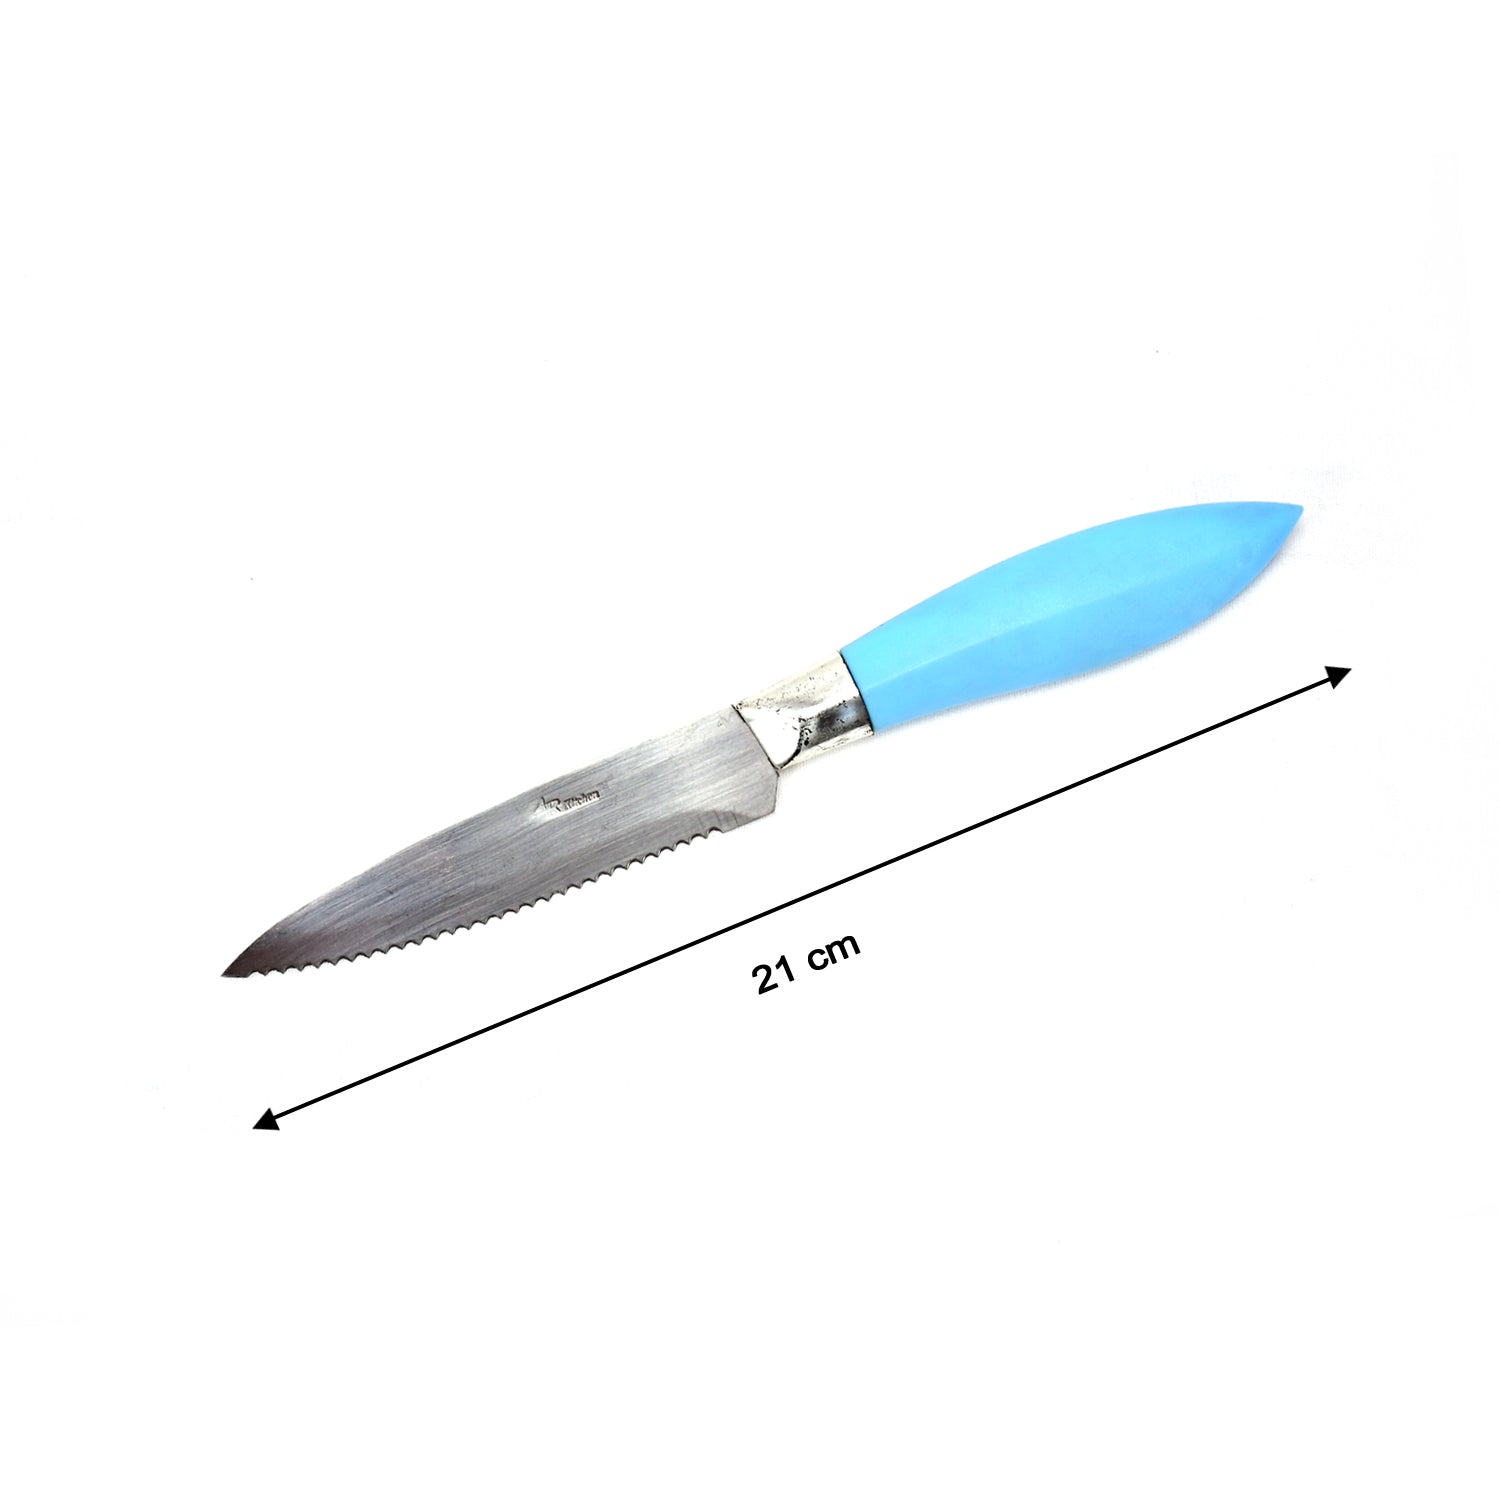 2295 Durable Serrated Vegetable/Meat Cutting Knife DeoDap